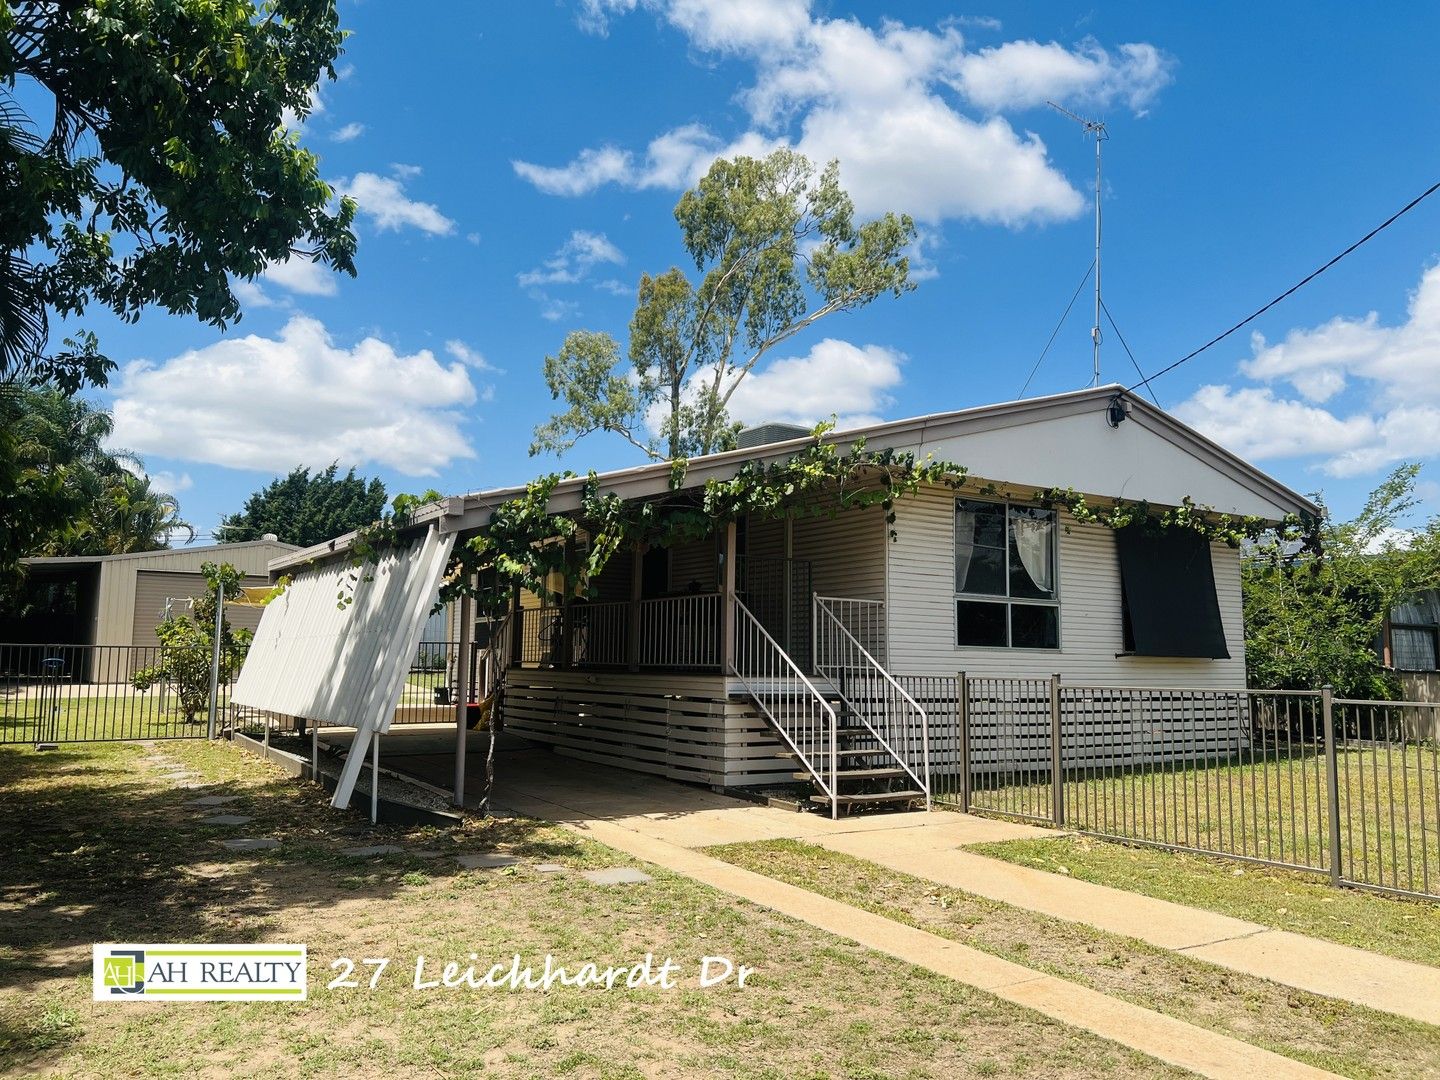 3 bedrooms House in 27 Leichhardt Dr MORANBAH QLD, 4744